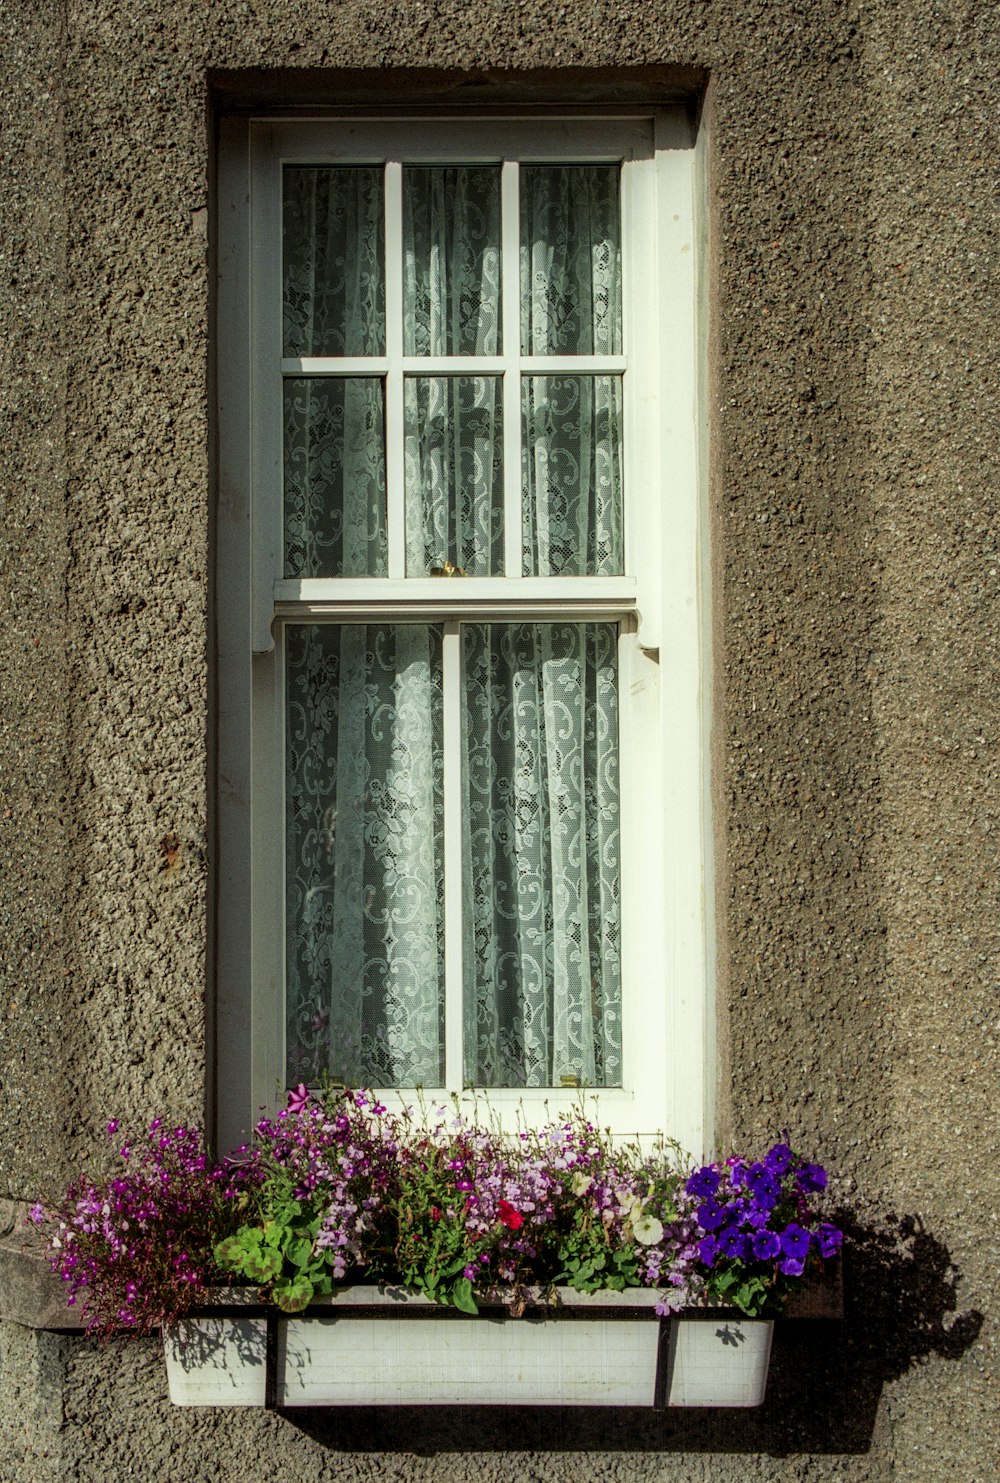 a window box with flowers in it